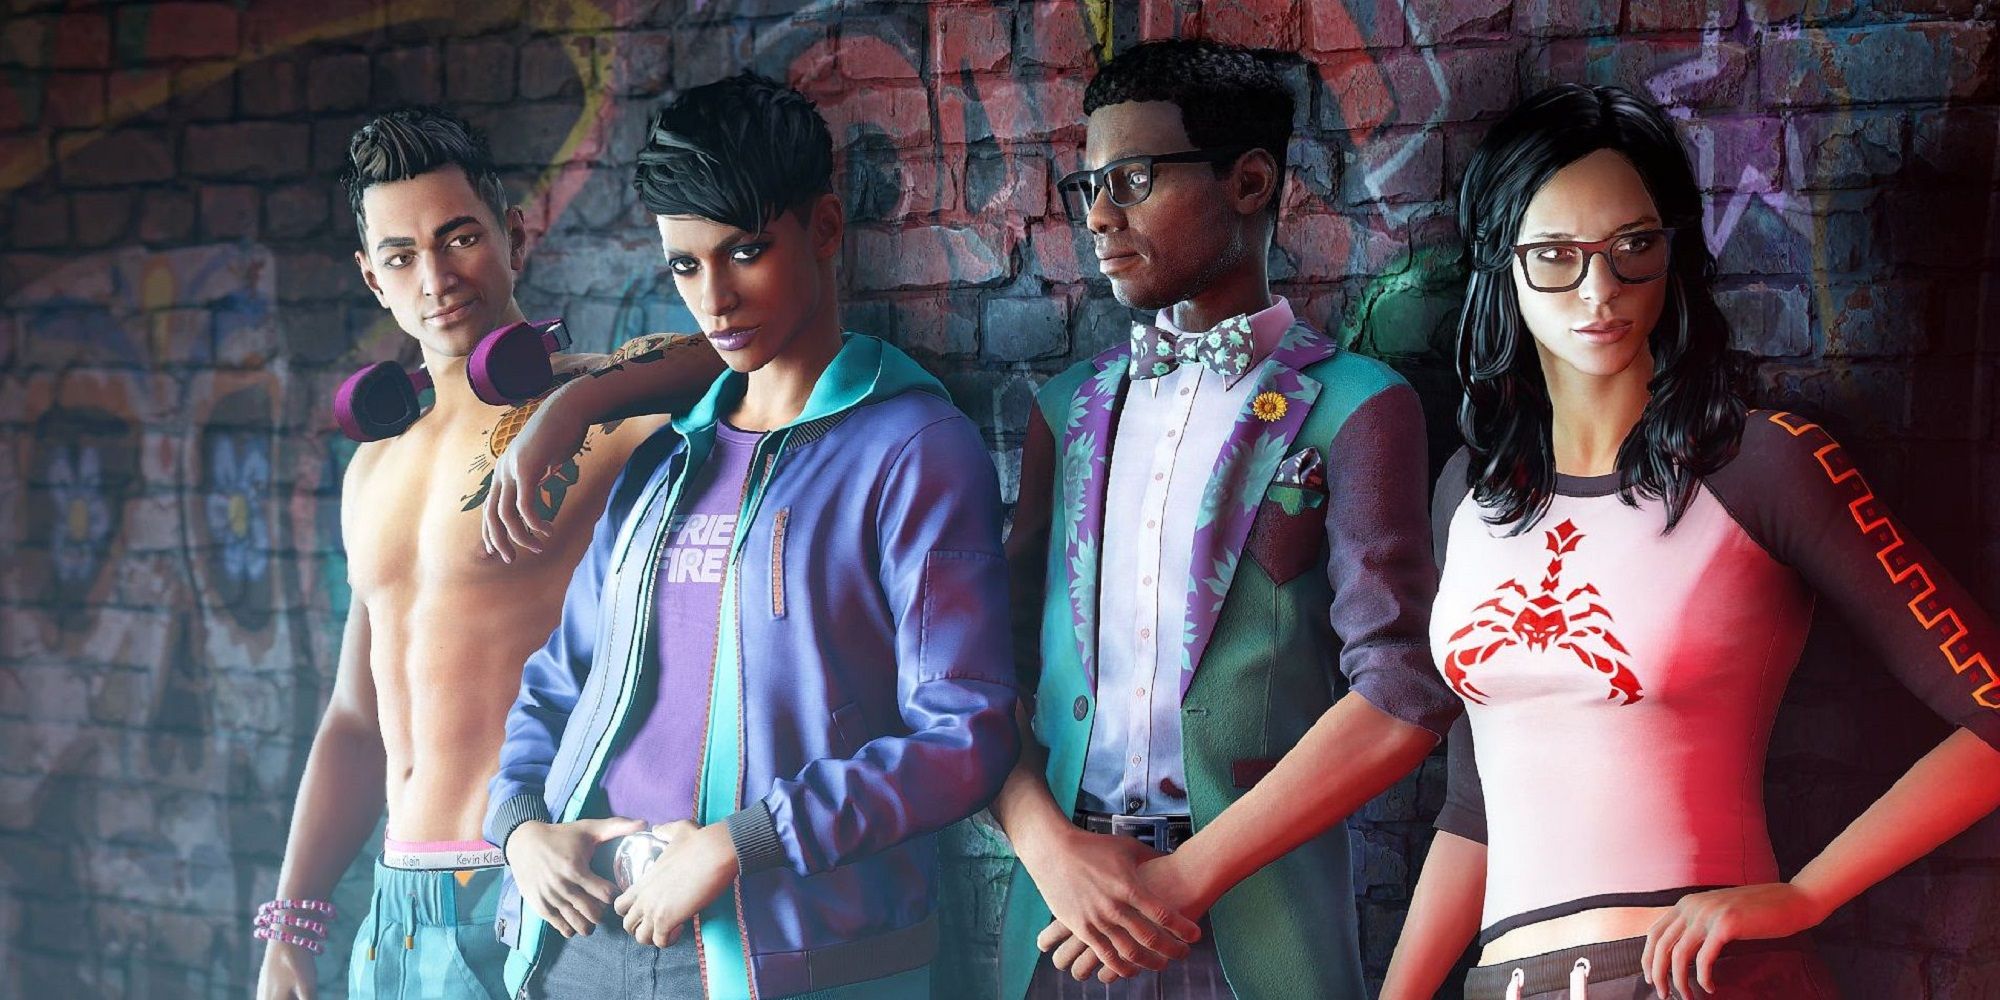 Saints Row 2022 Characters Left To Right, Kev, The Boss, Eli, Neenah